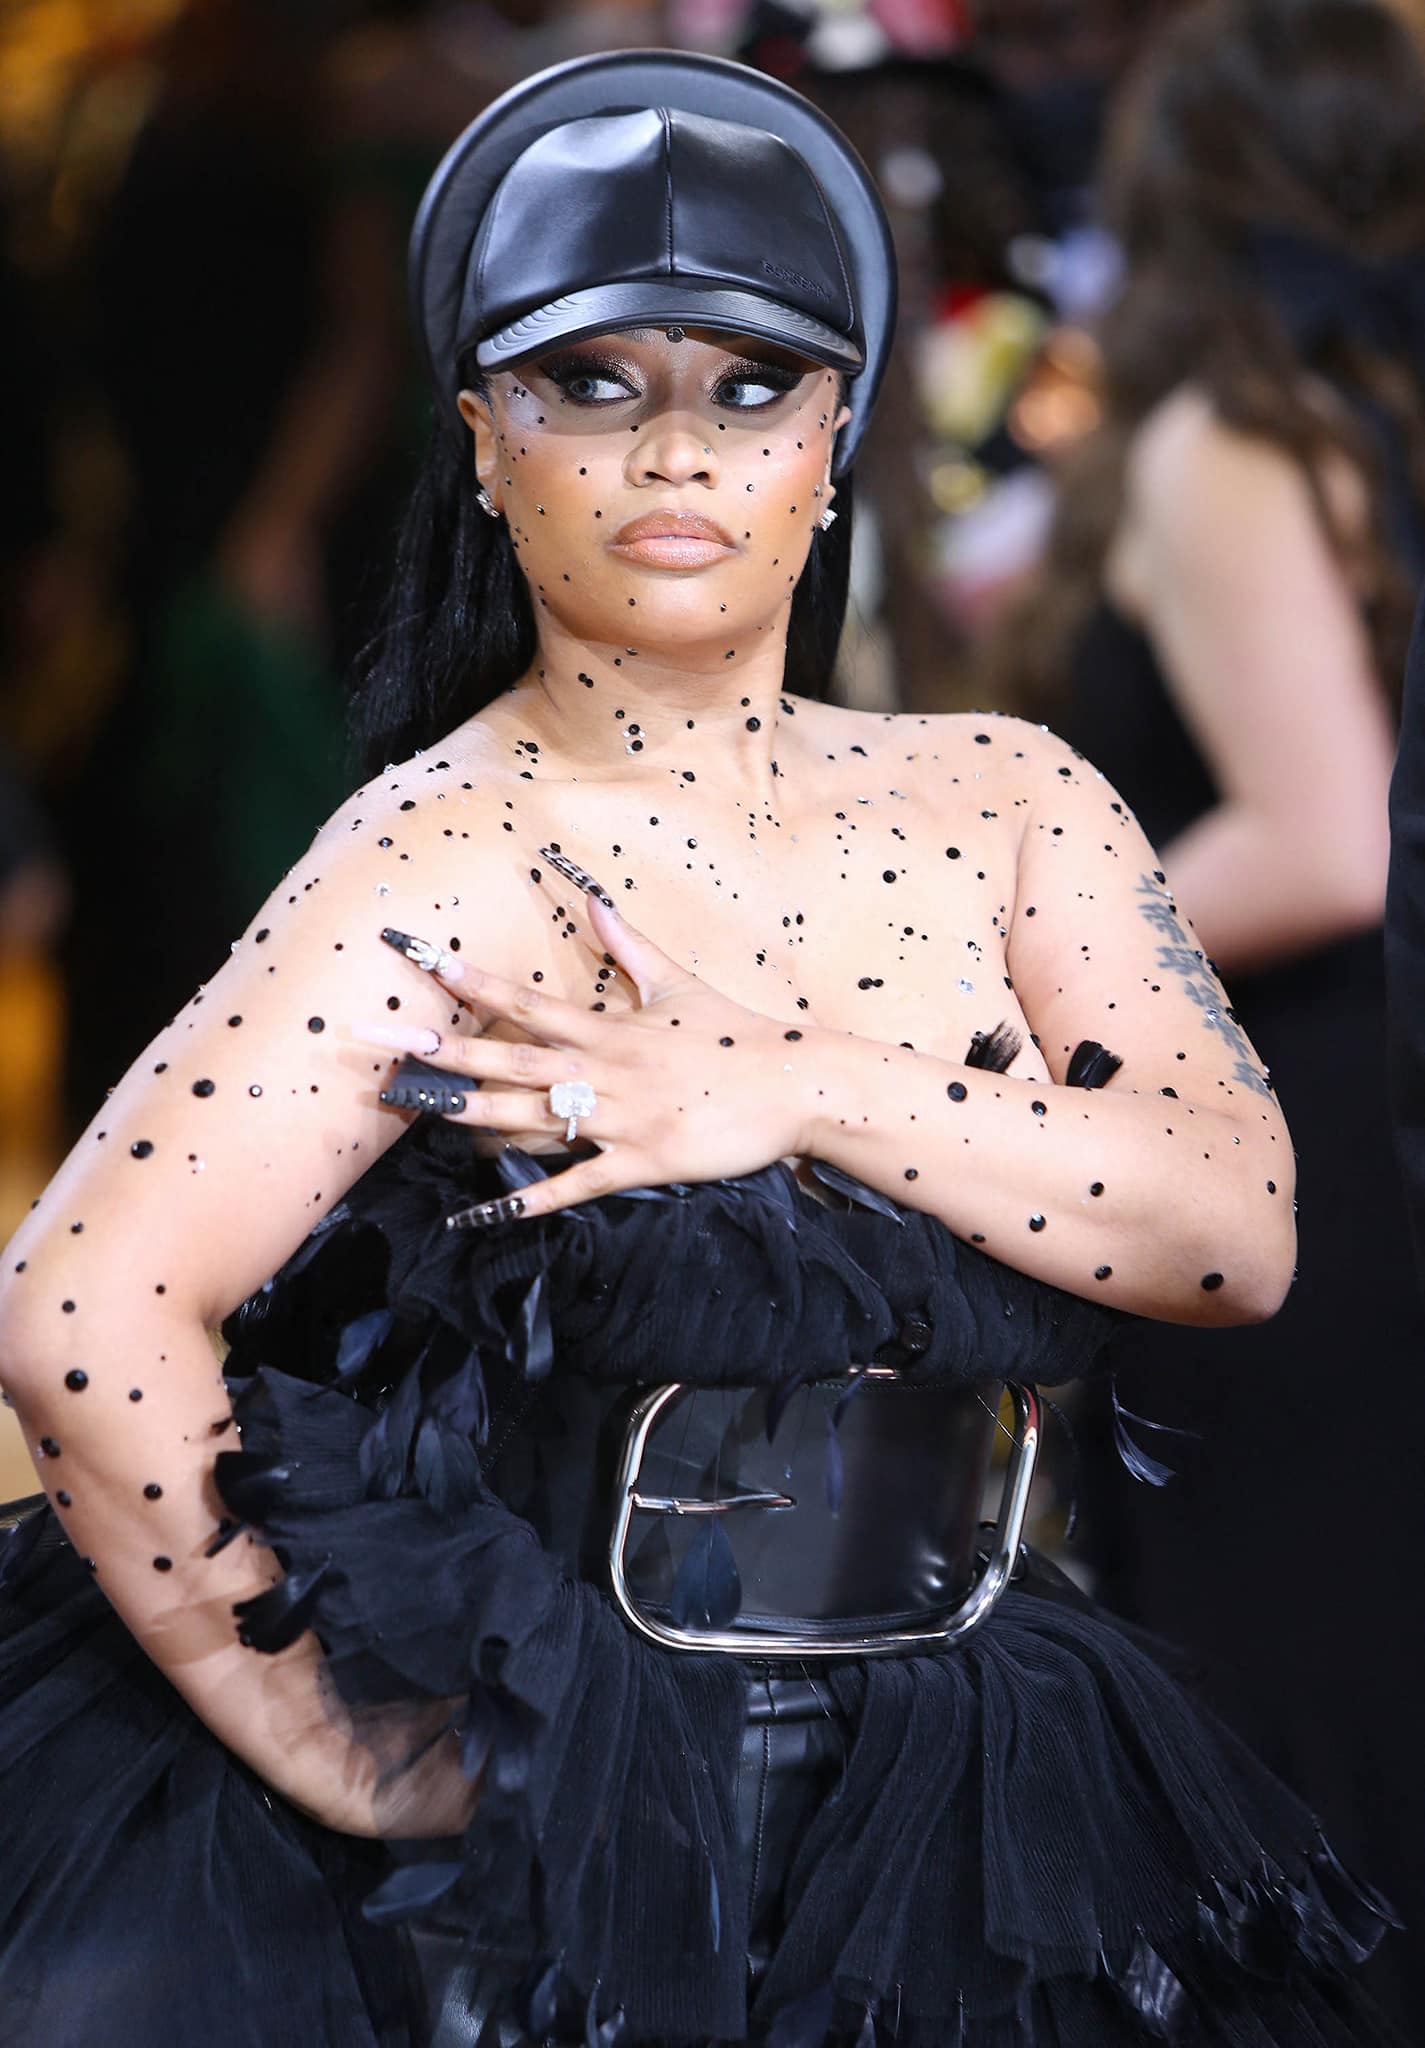 Nicki Minaj teams her outfit with a leather baseball cap and wears bronze smokey eyeshadow, thick winged eyeliner, peachy blush, and matching lipstick